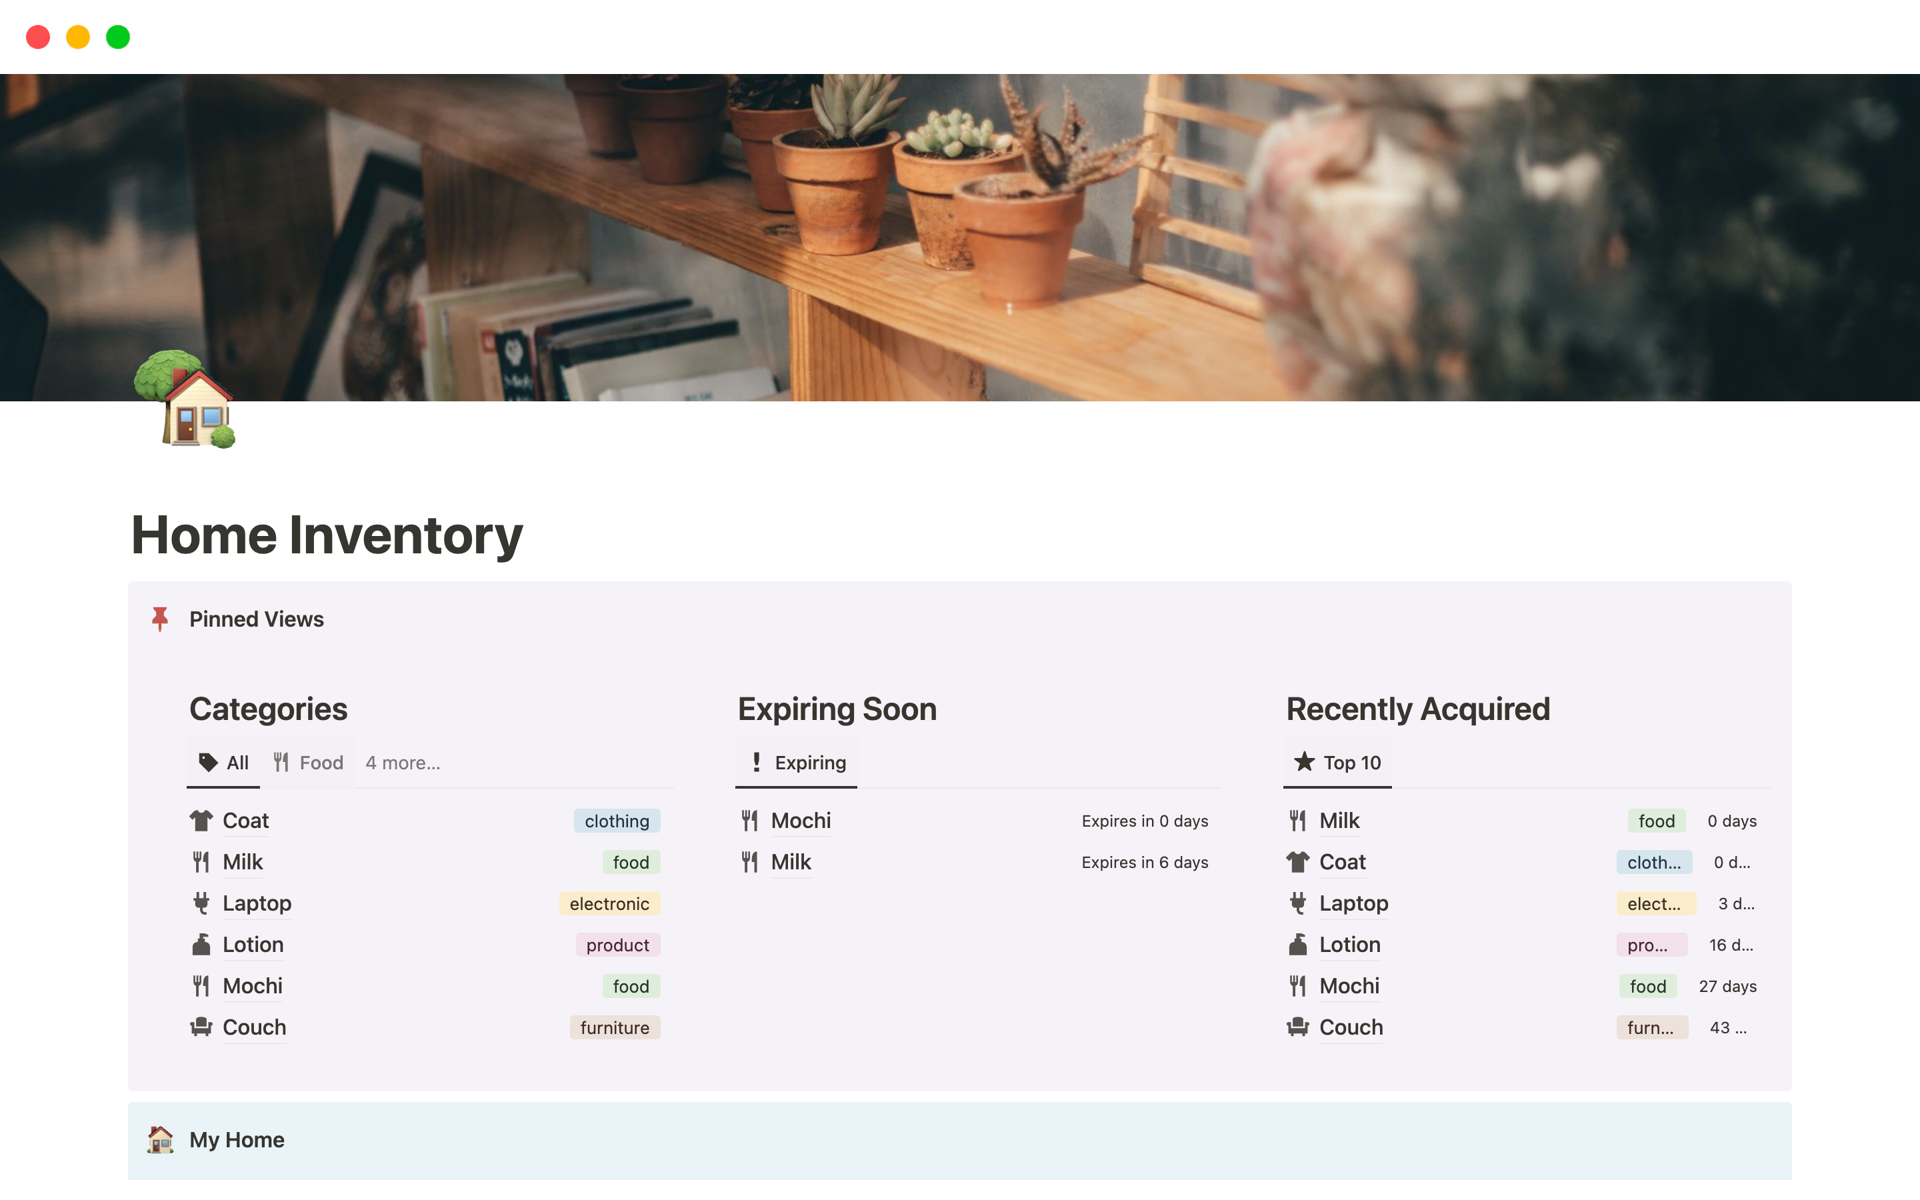 Take control of your home inventory needs with this template!